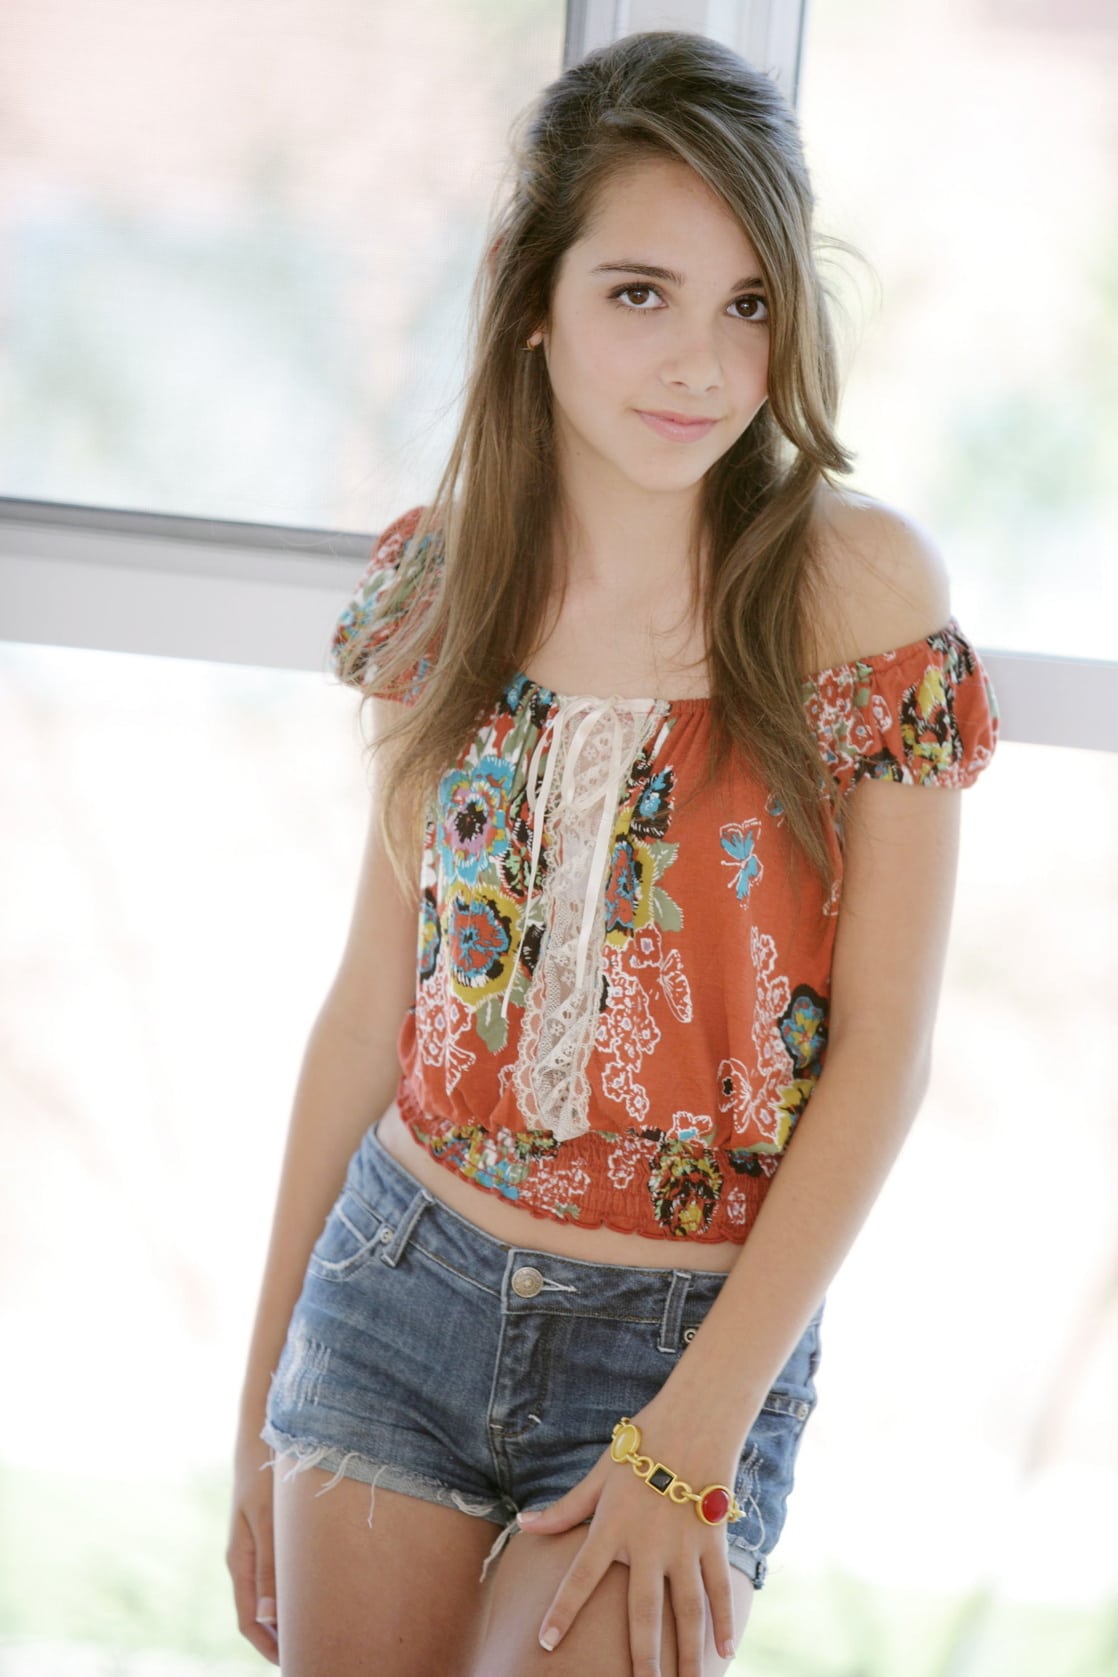 Download Haley Pullos Movies And Tv Shows Background - Akeno Gallery